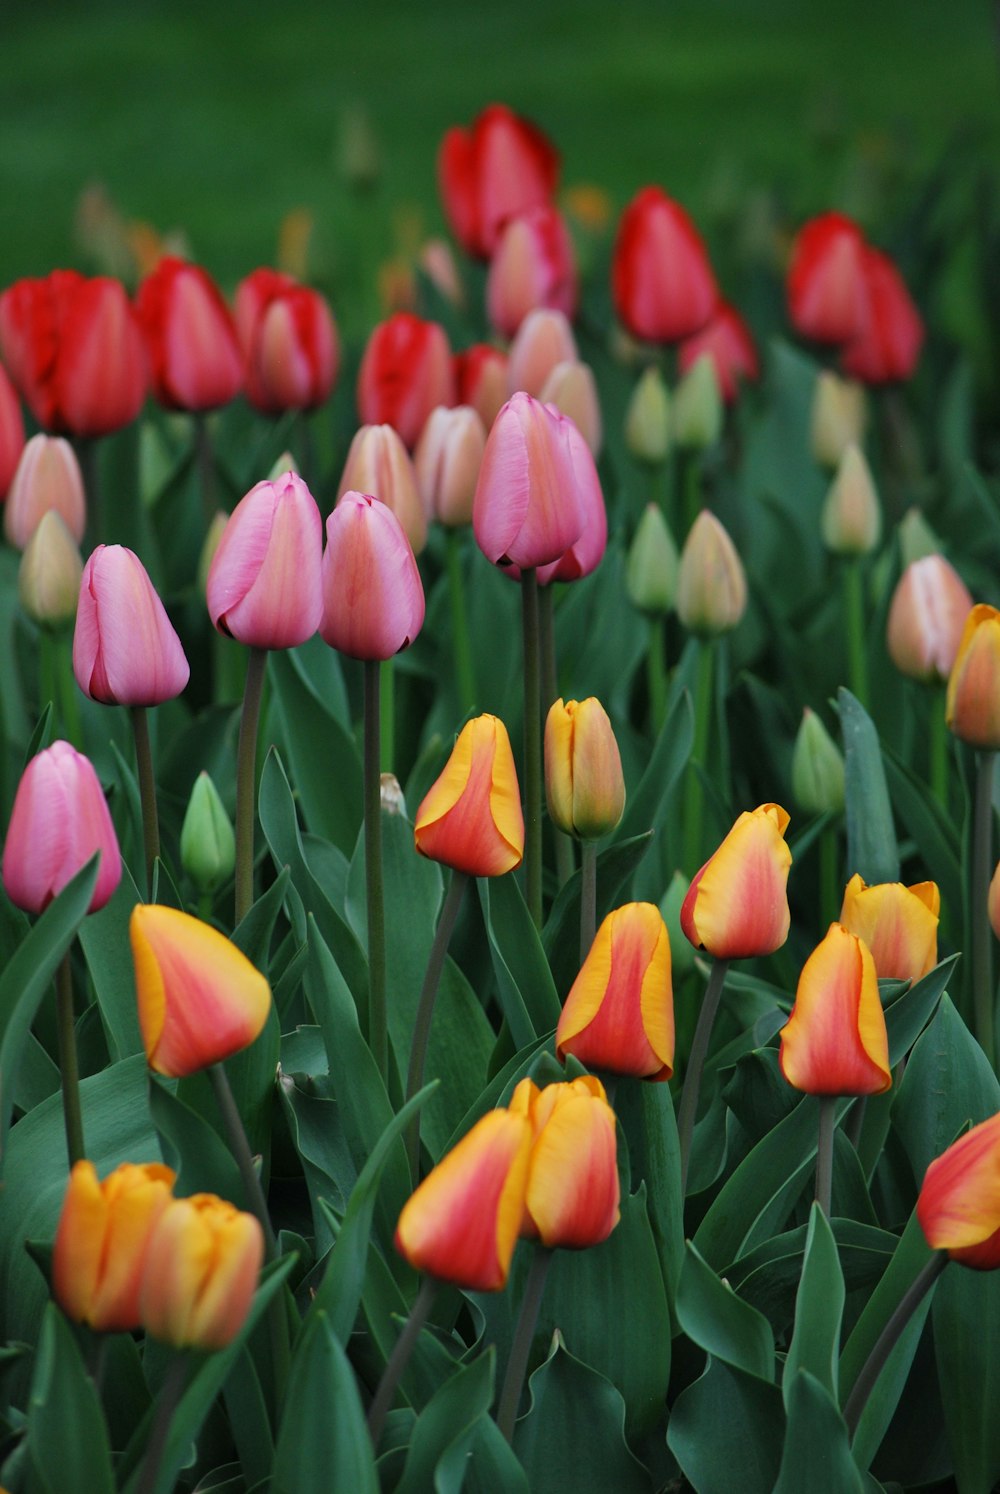 pink and yellow tulips in bloom during daytime